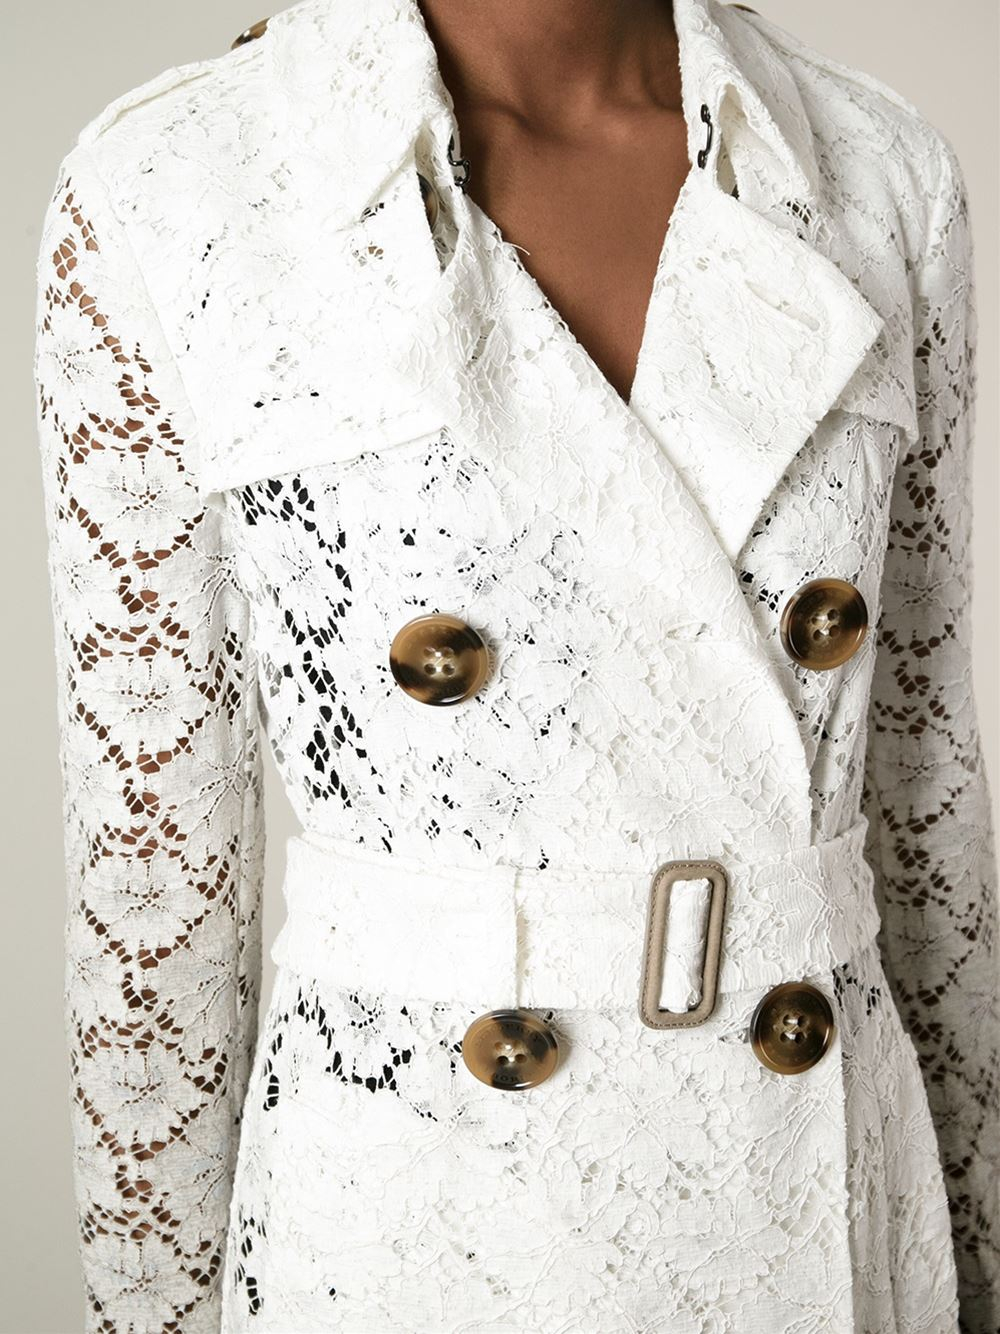 Burberry Prorsum Lace Trench Coat in White | Lyst